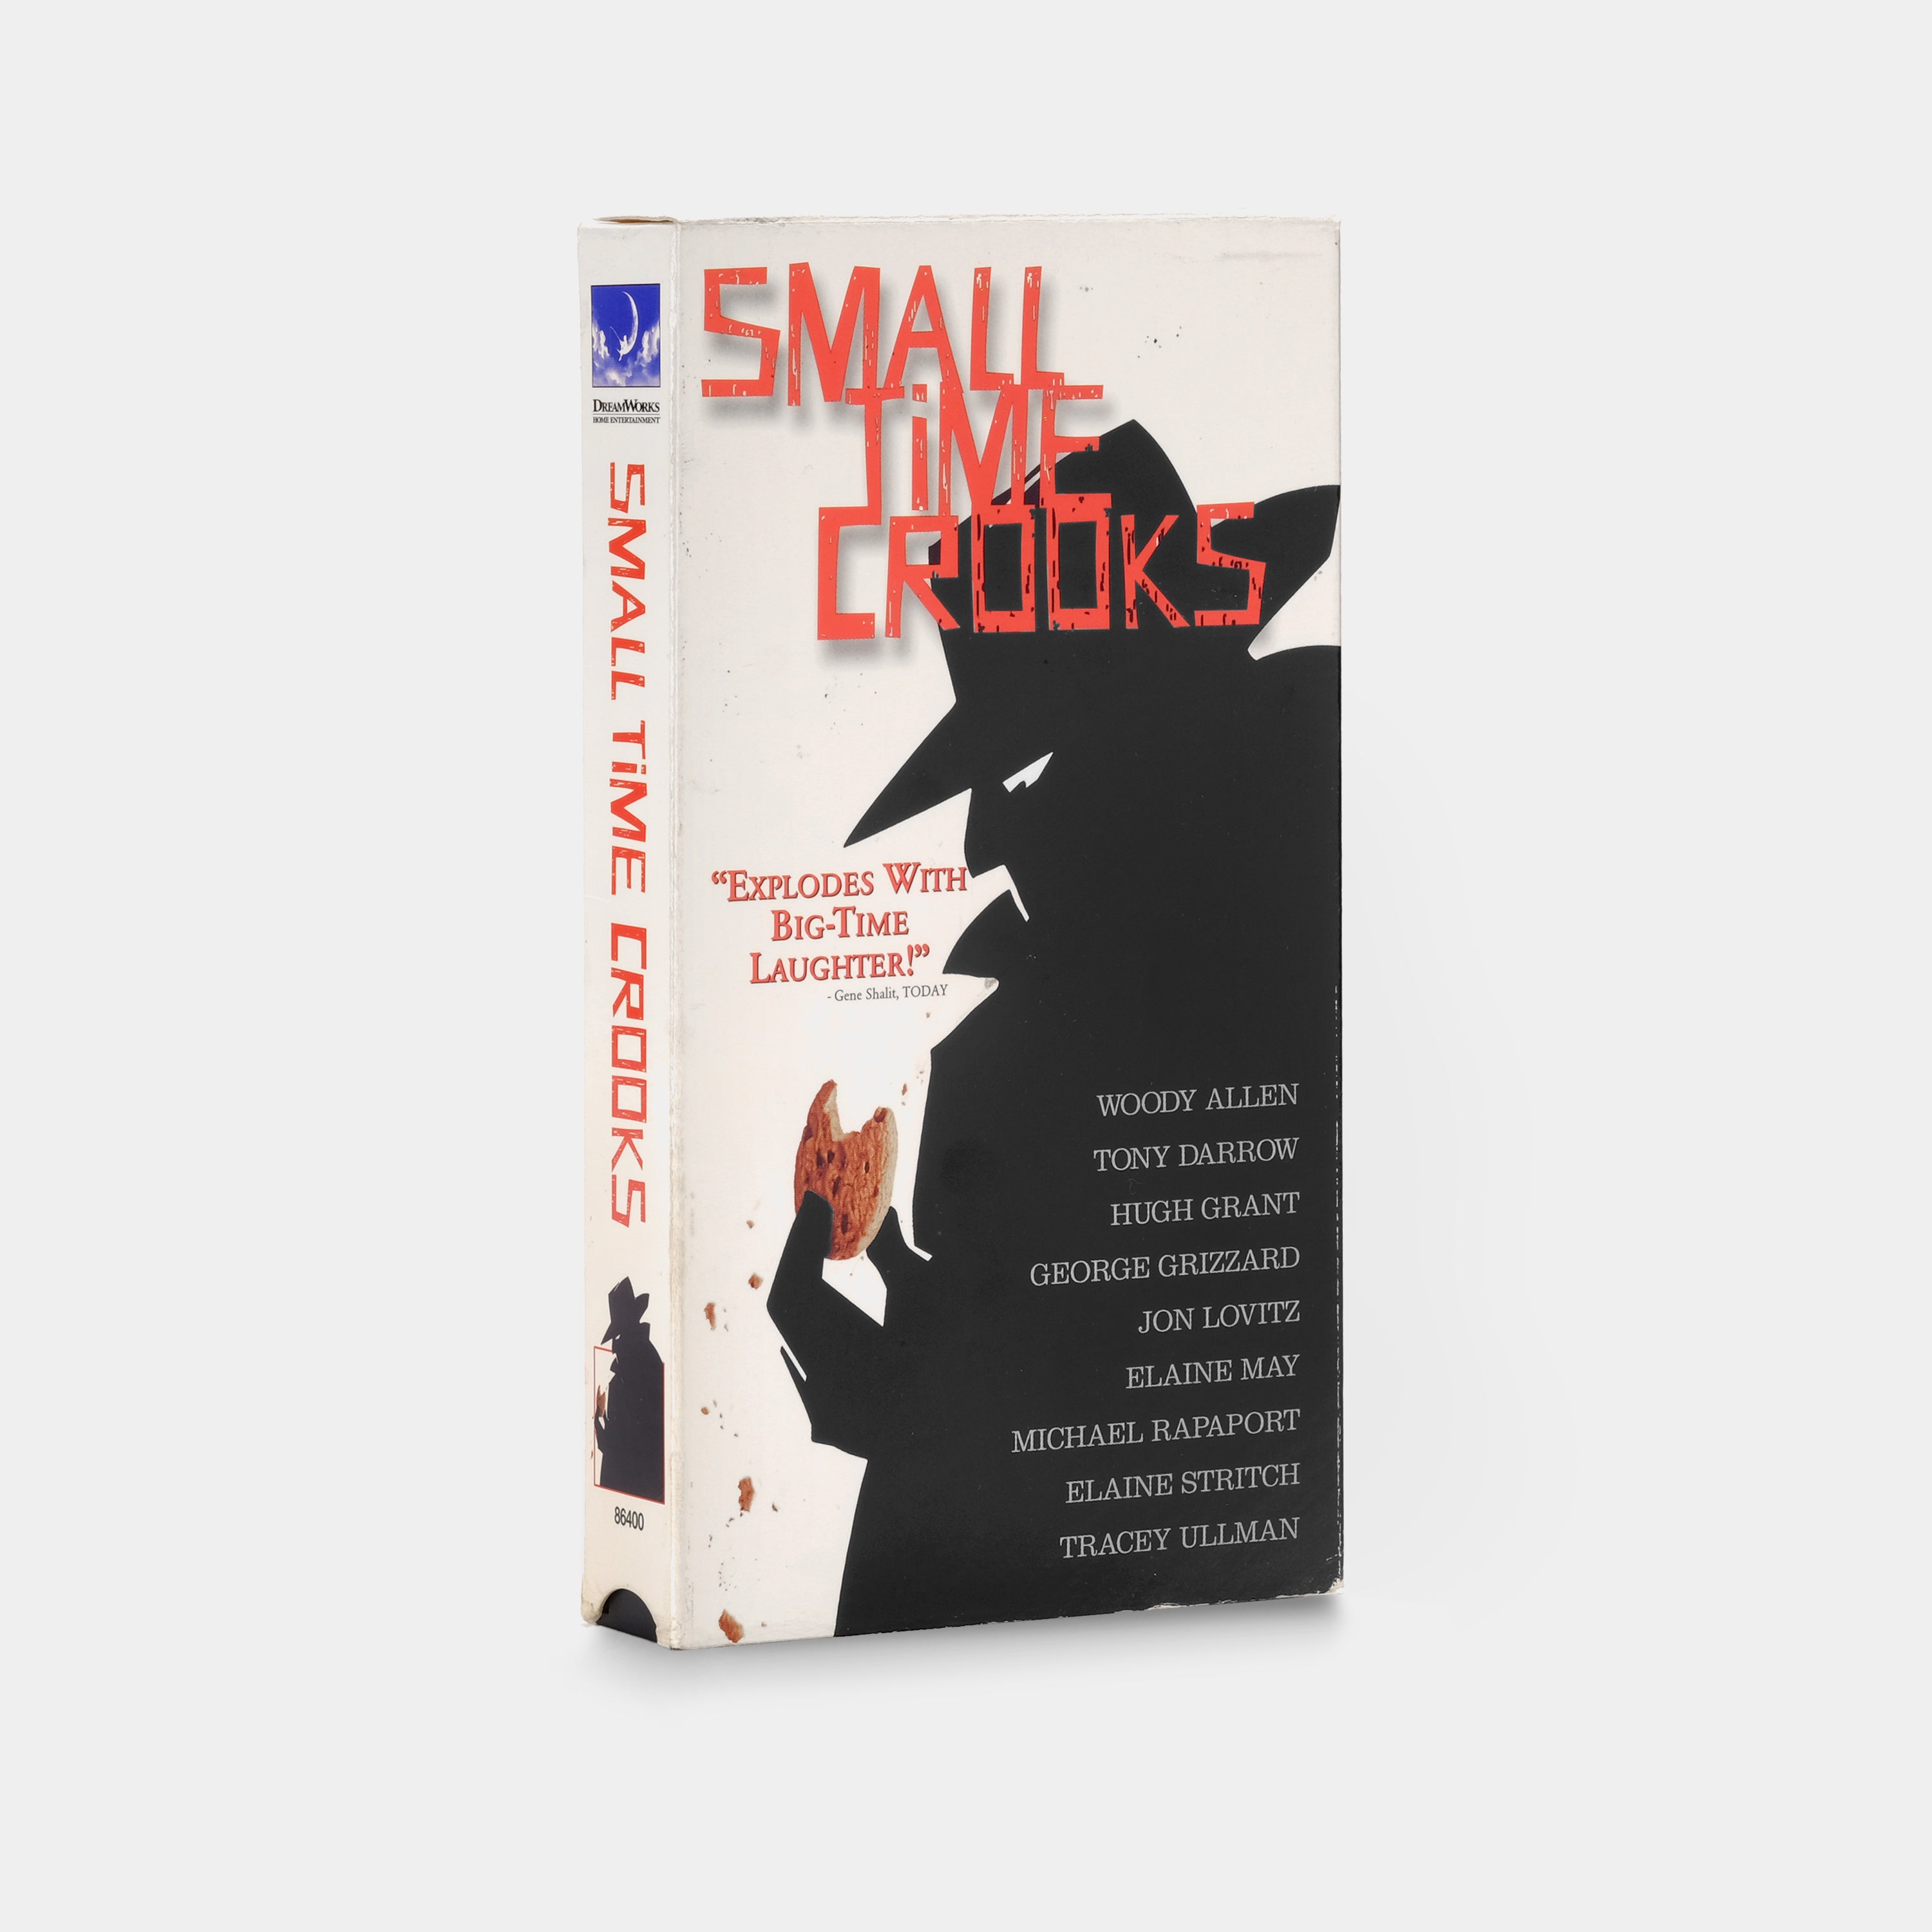 Small Time Crooks VHS Tape